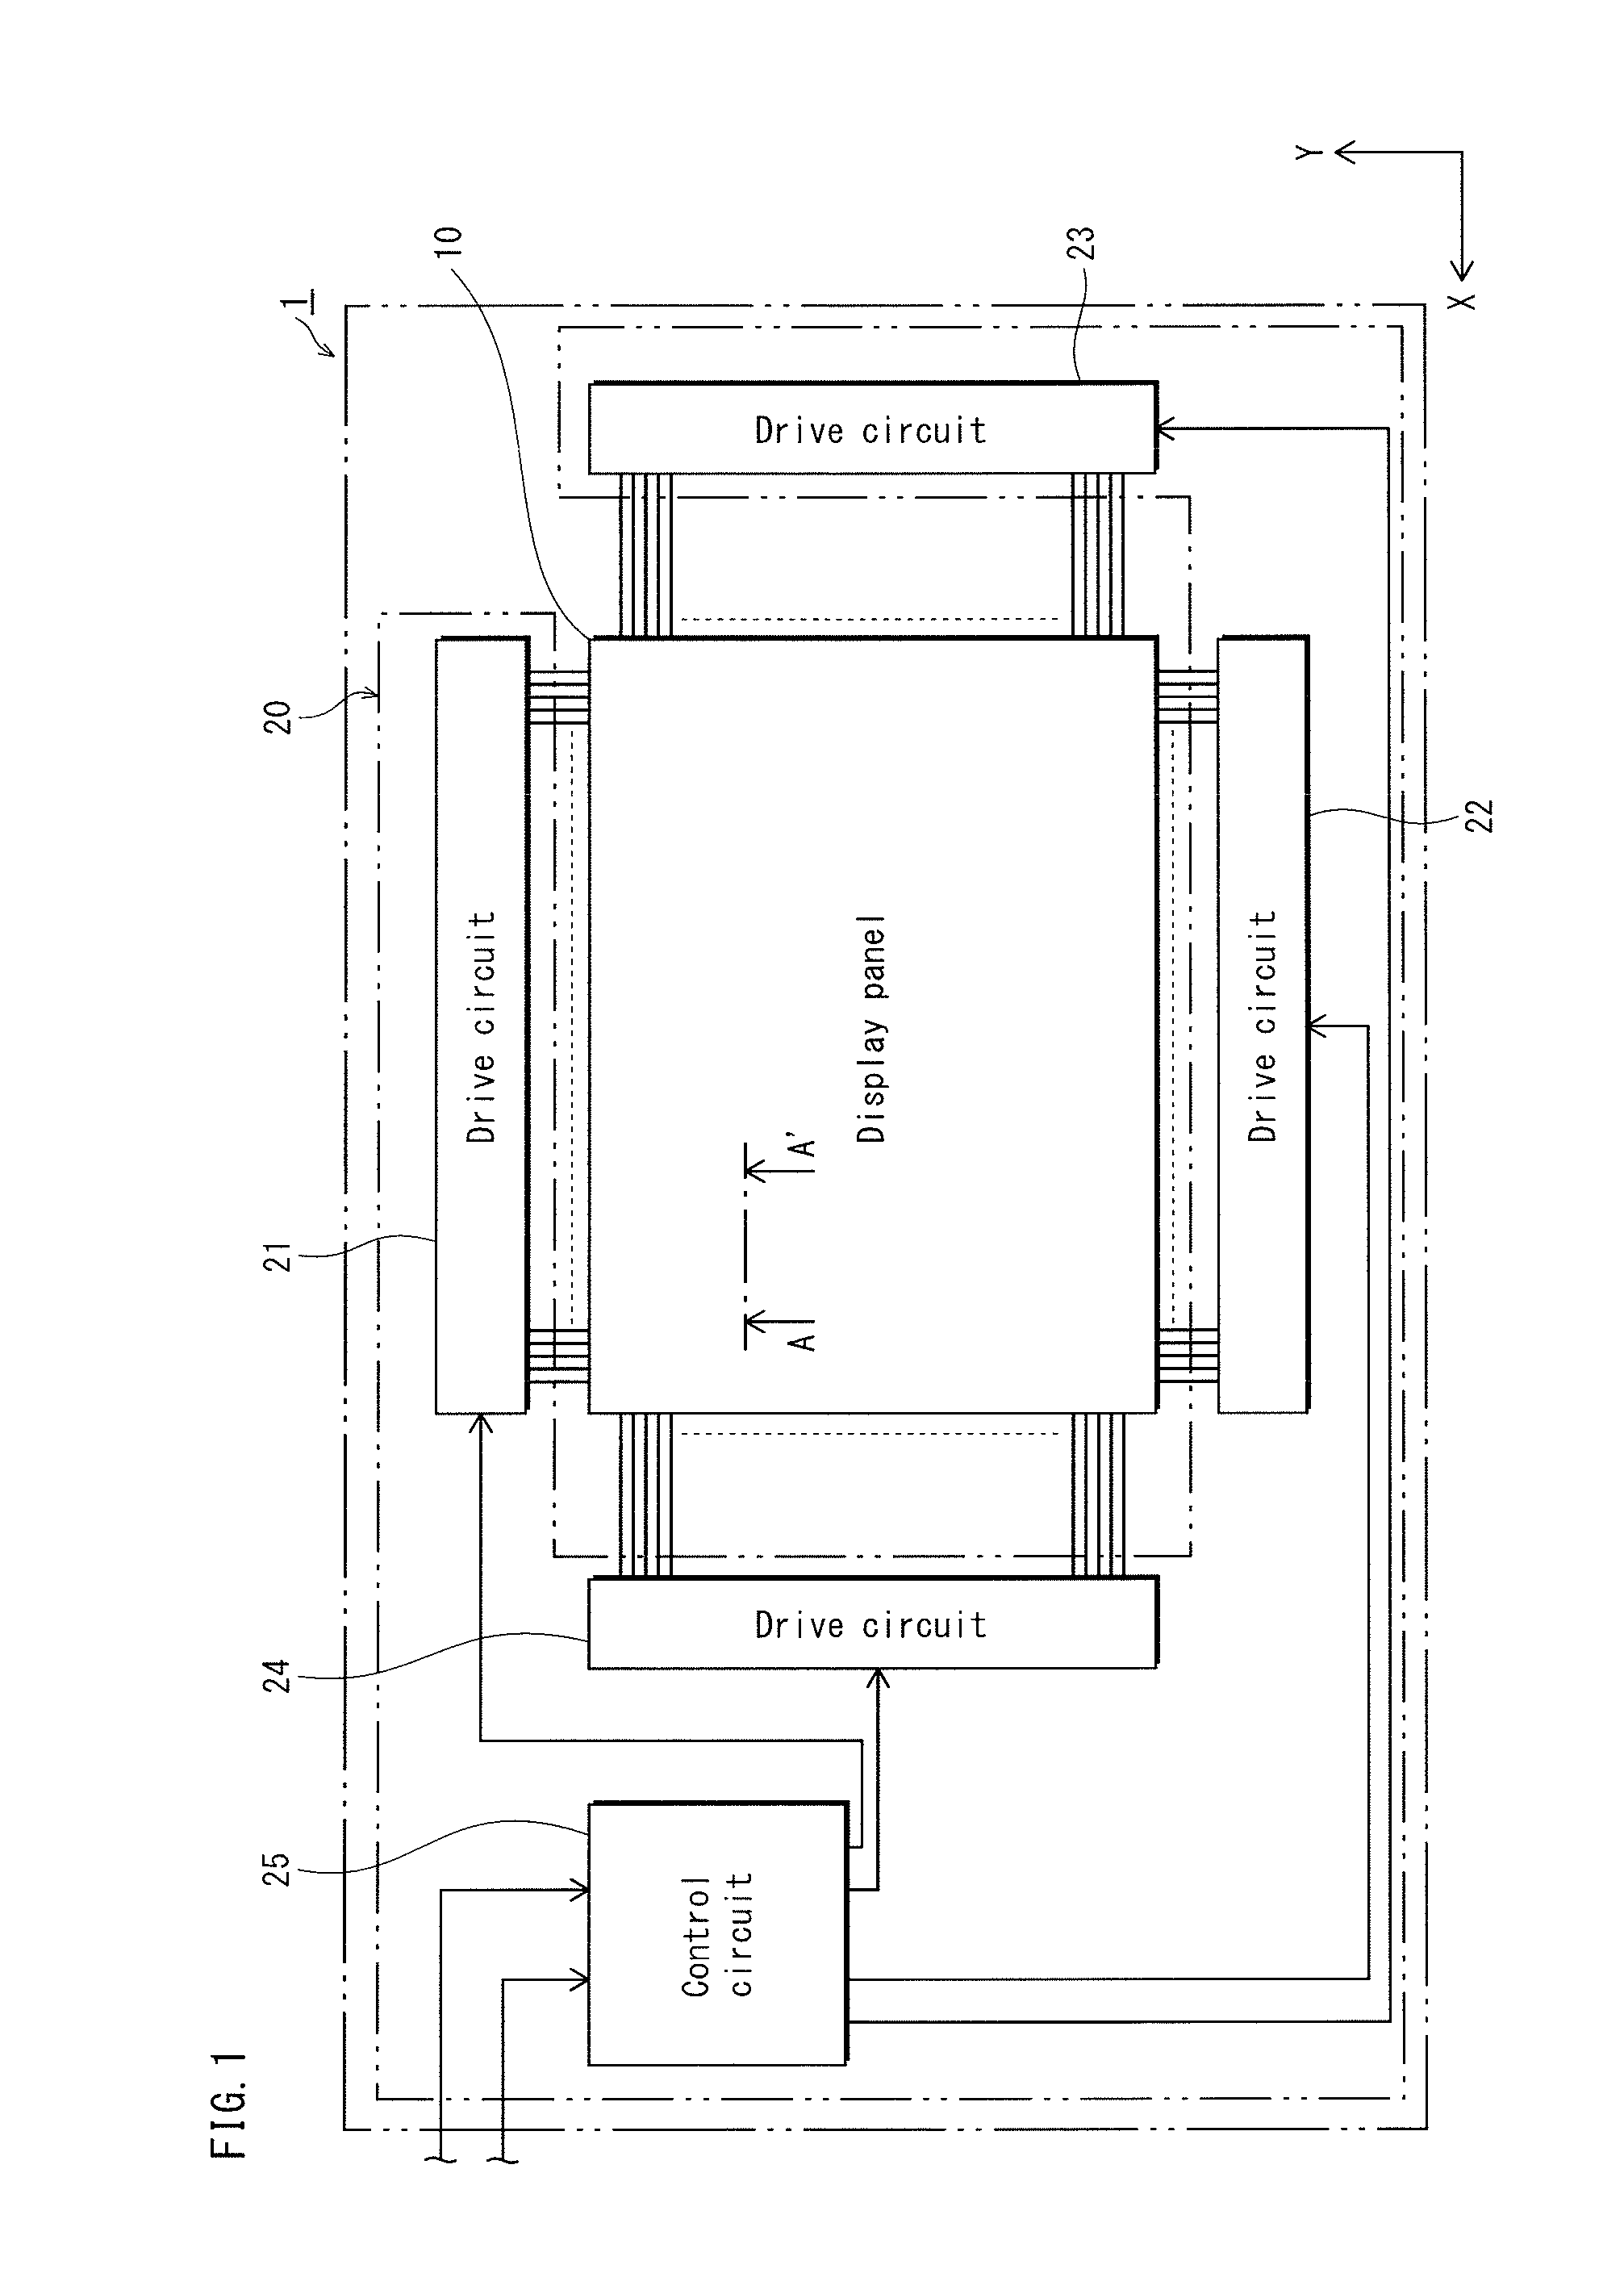 Organic el panel and method for manufacturing same